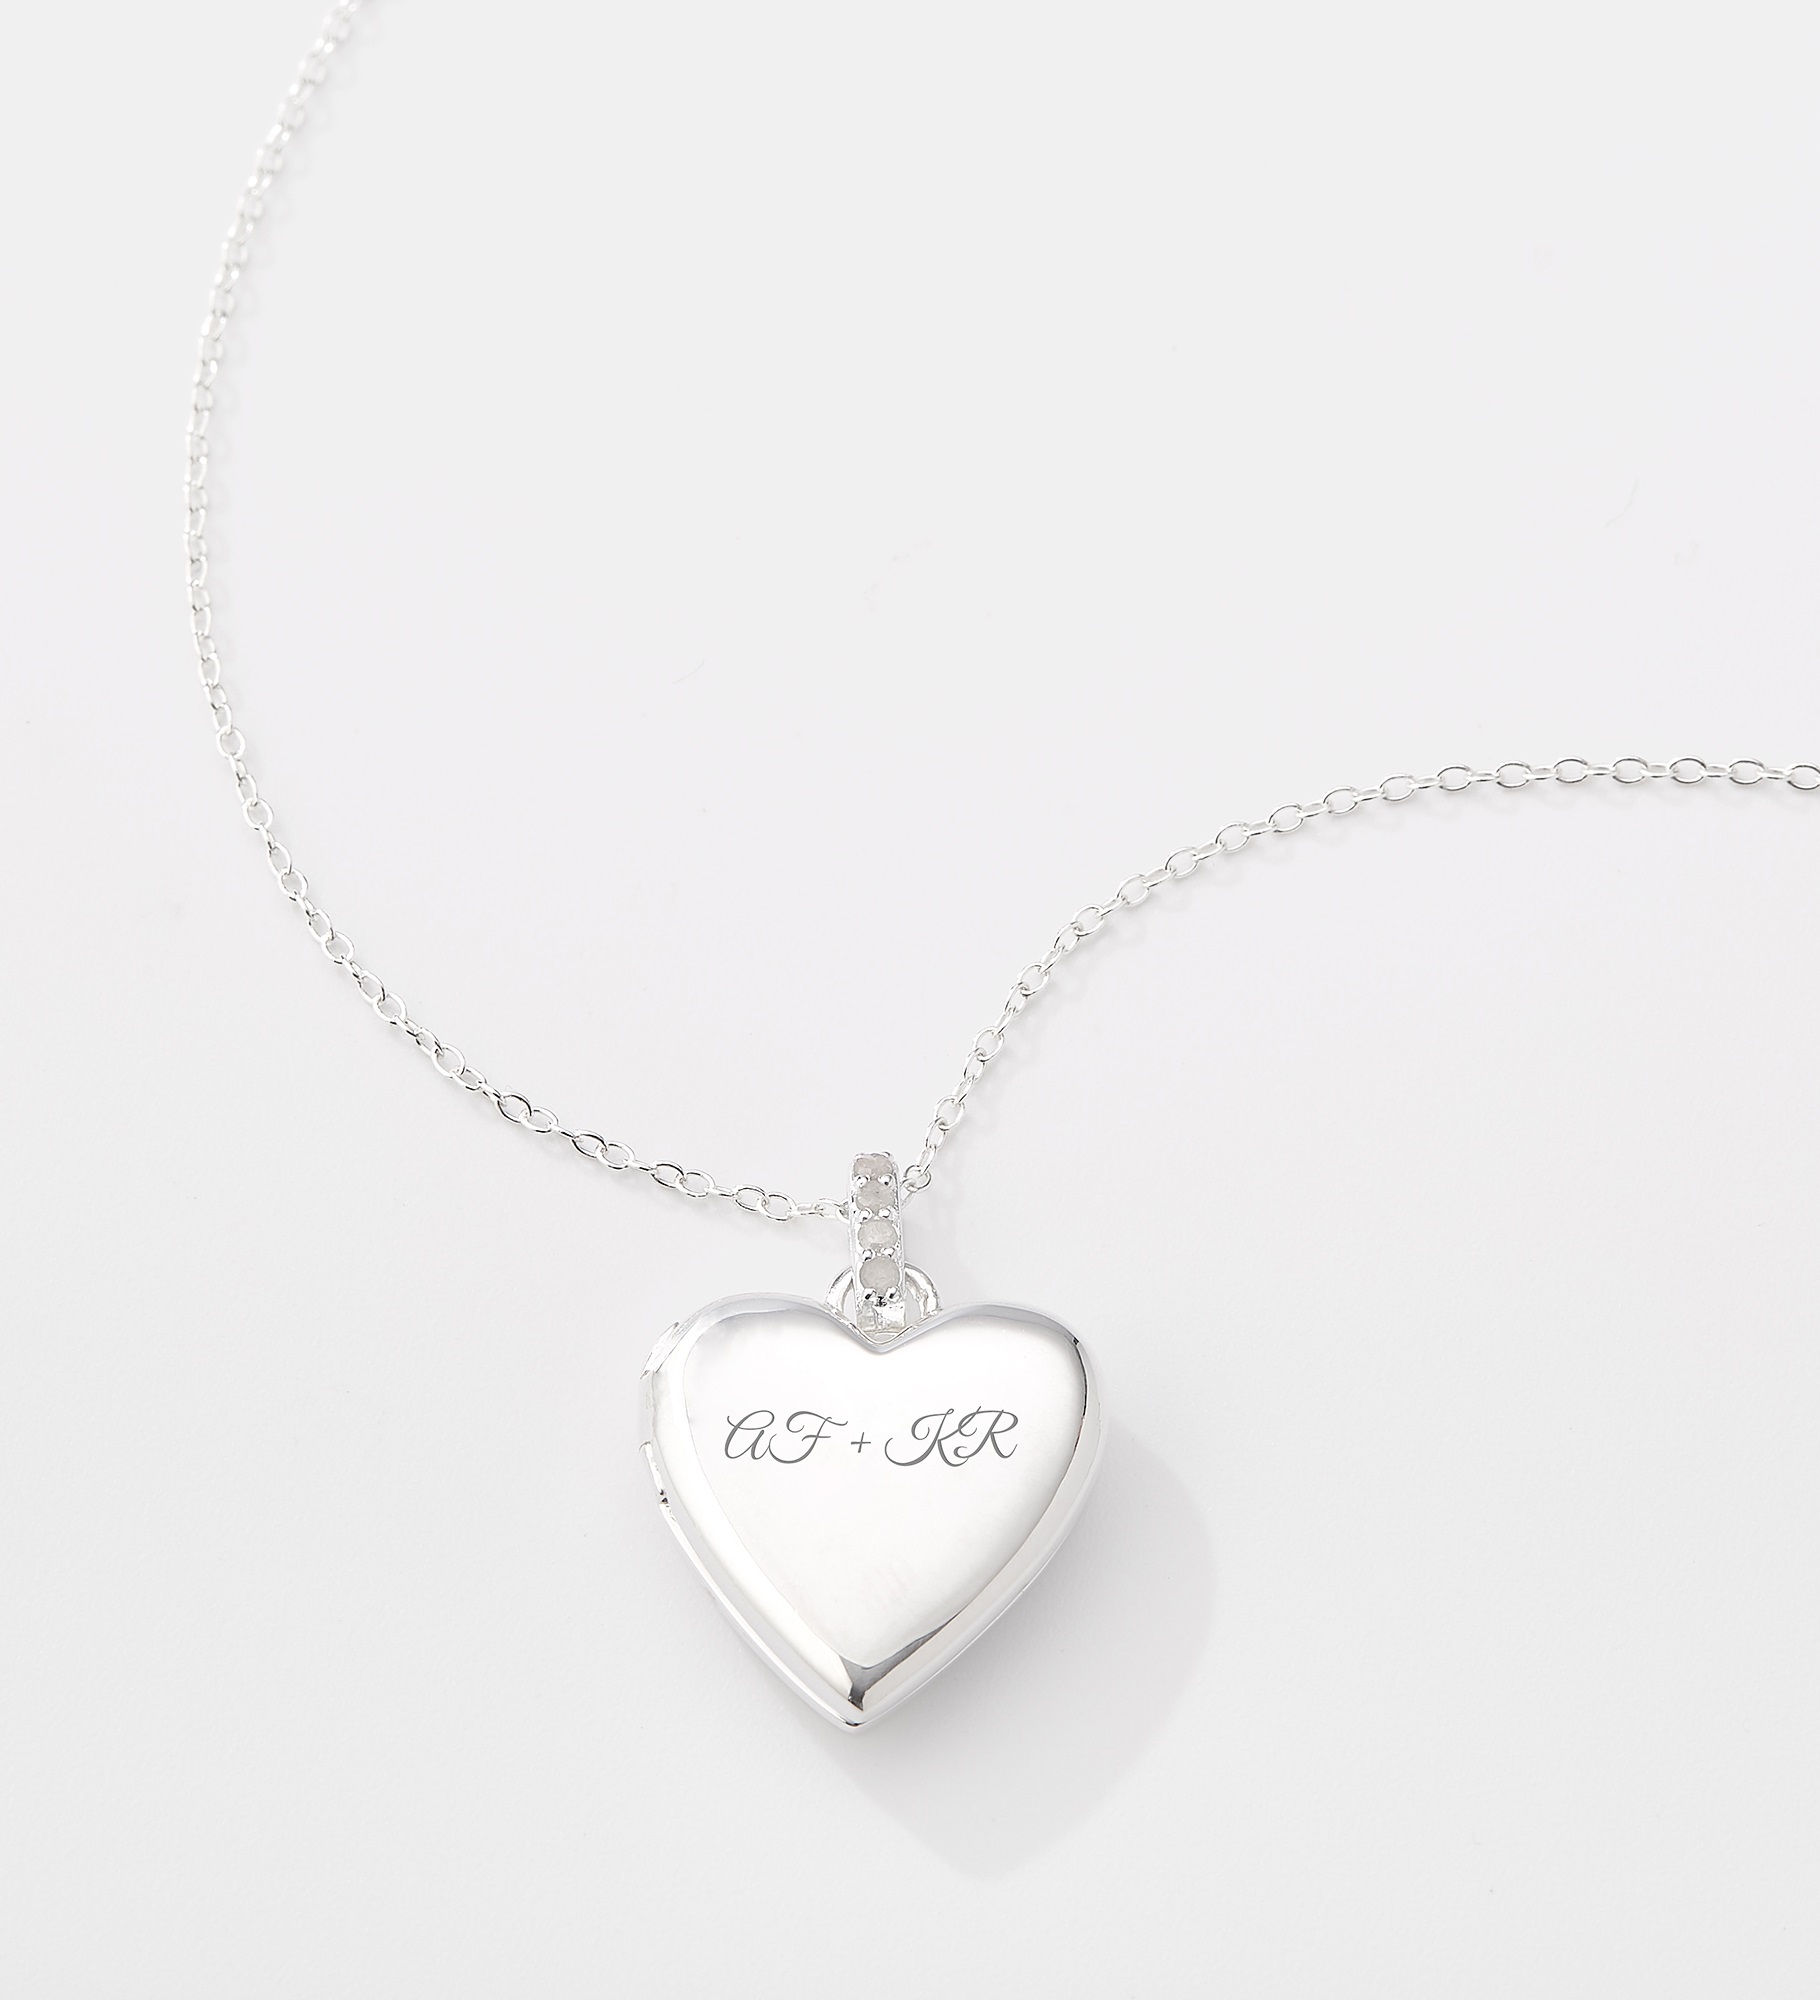  Engraved Sterling Silver Heart Locket with Diamonds Necklace